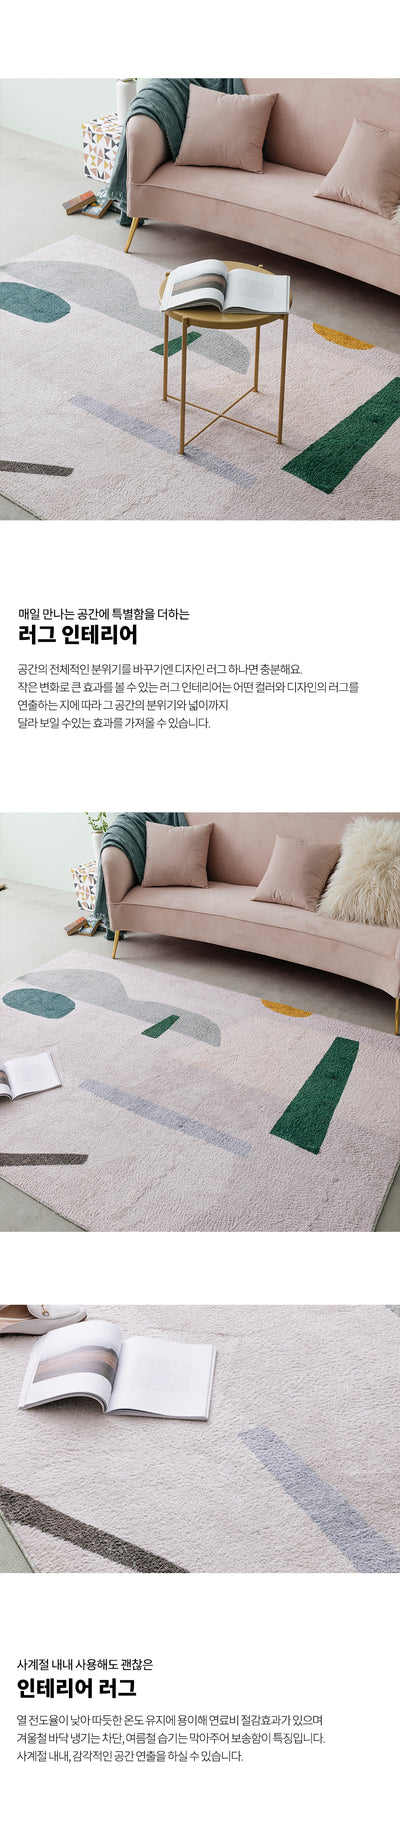 fromis interior rug